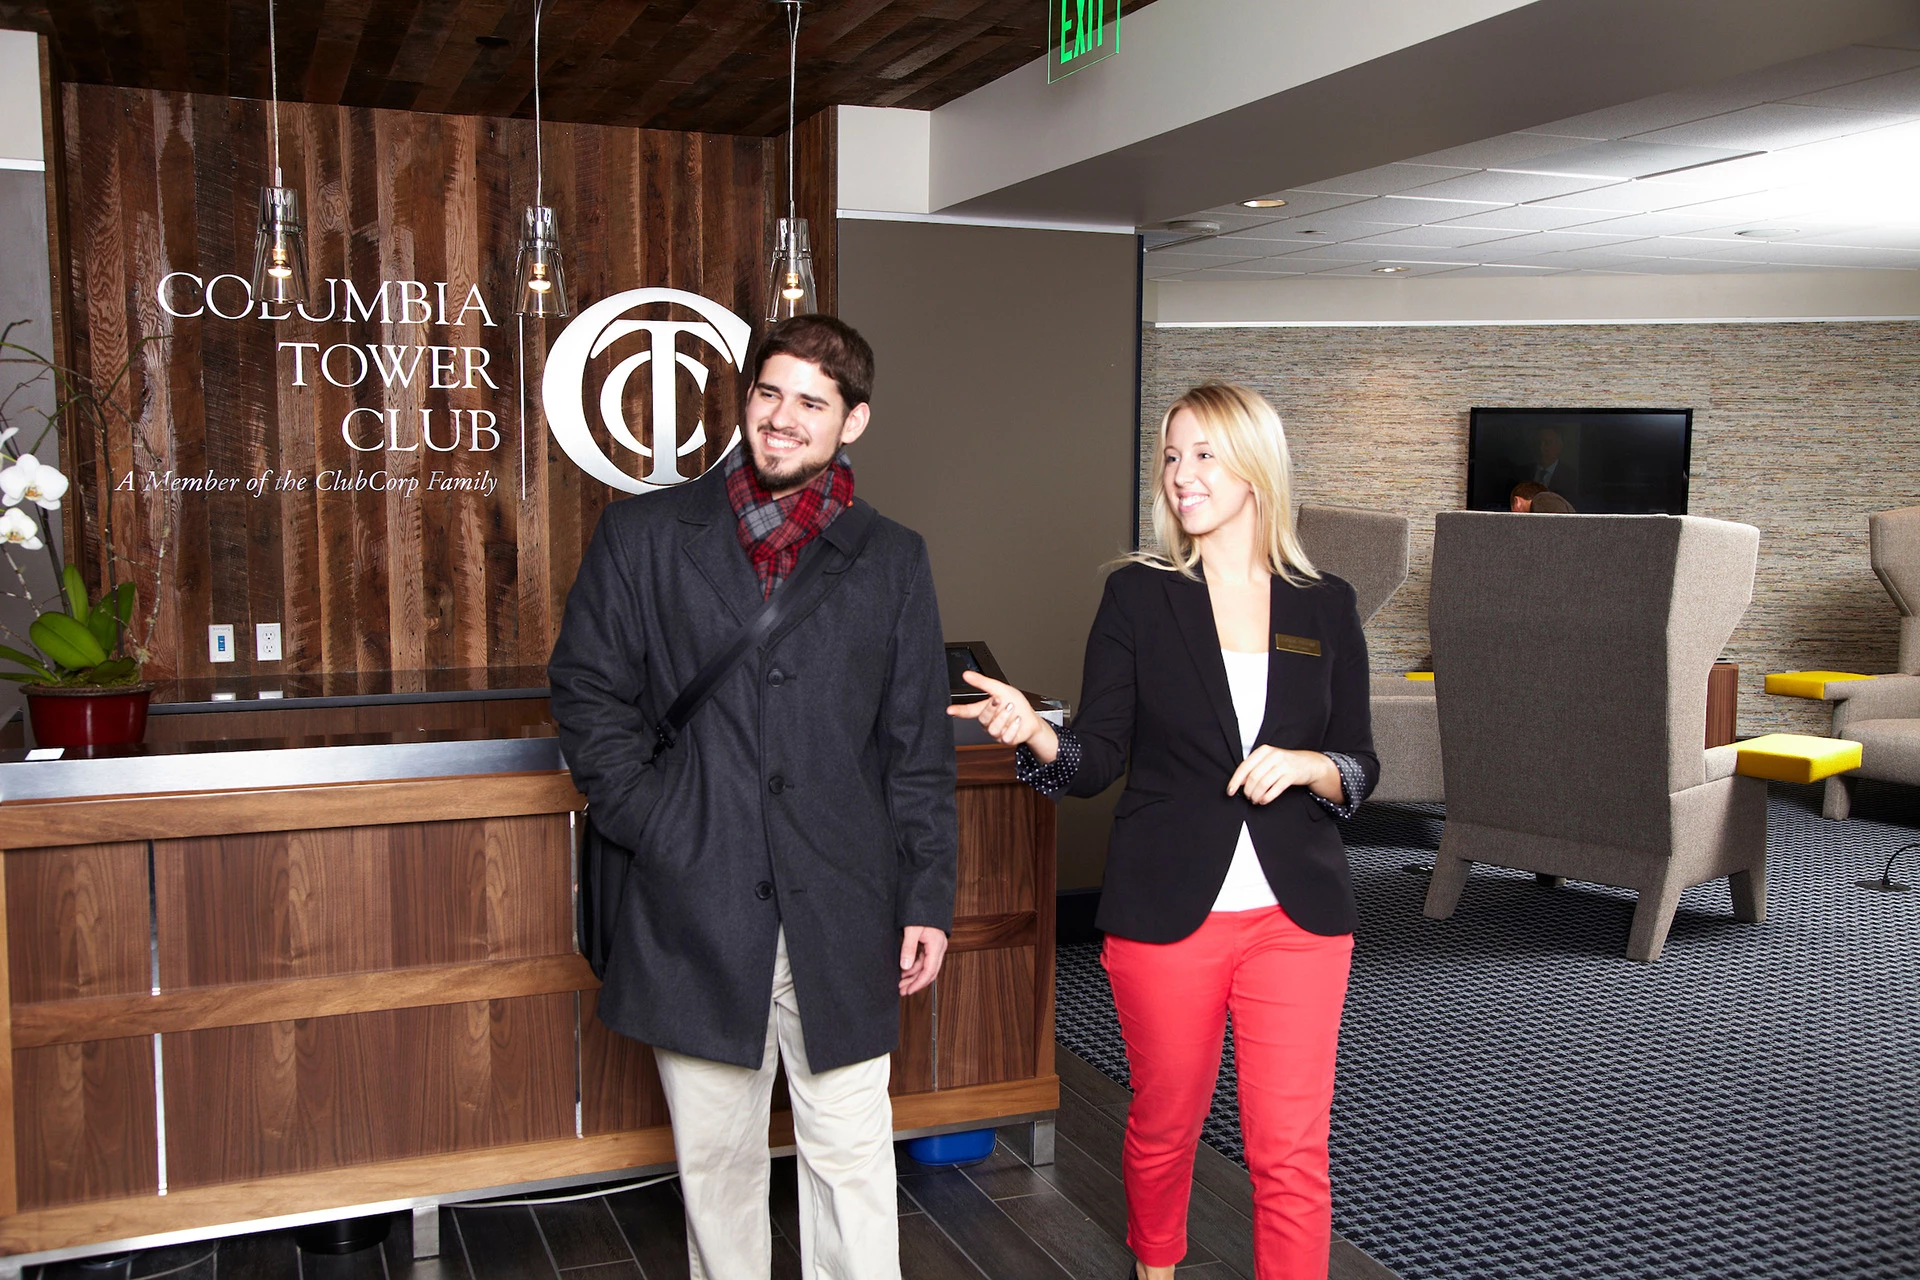 Columbia Tower Club - Entrance